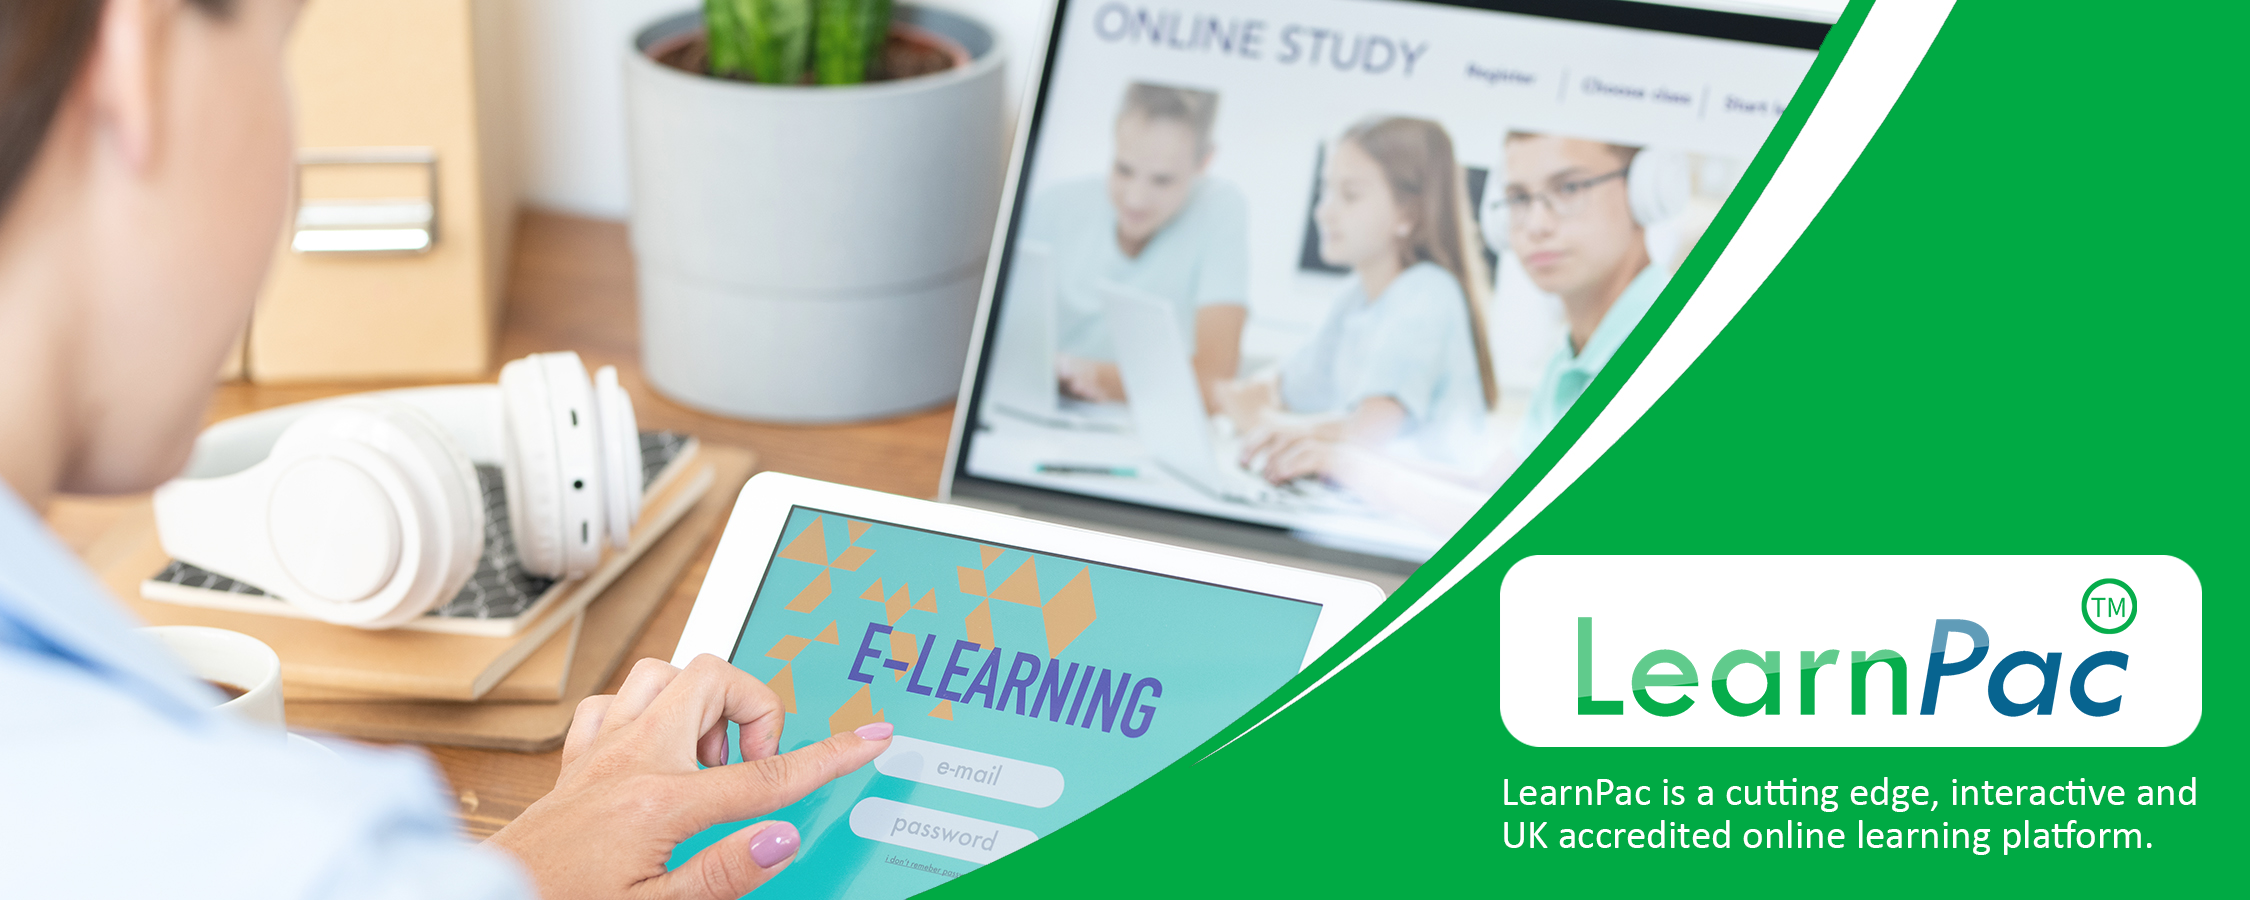 Care Certificate Standard 2 – Your Personal Development - Online Learning Courses - E-Learning Courses - LearnPac Systems UK -